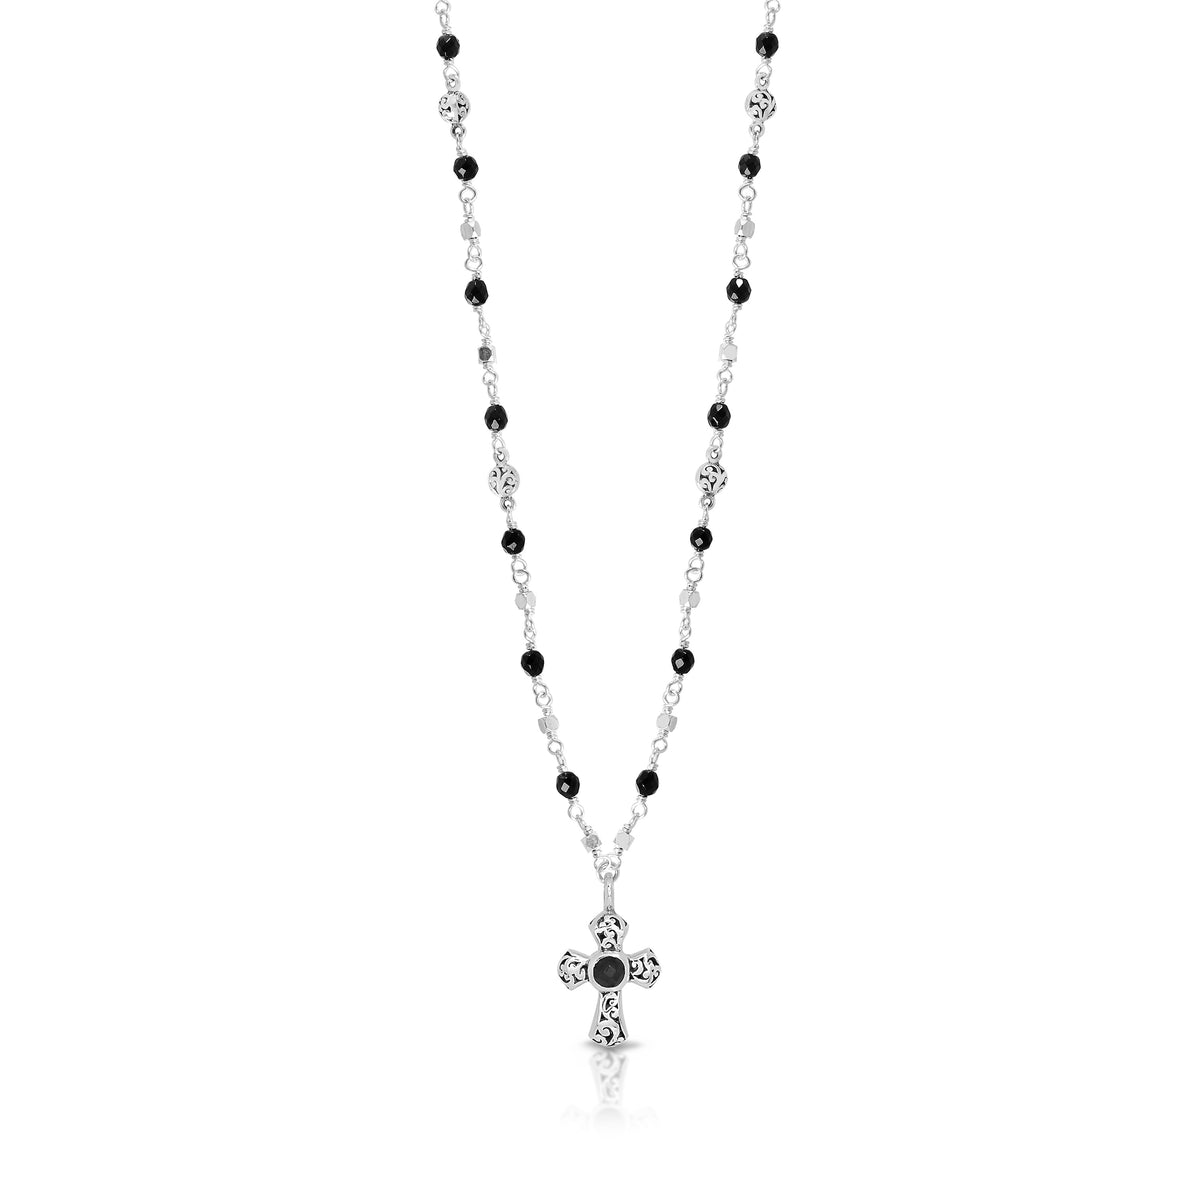 Black Onyx & LH Scroll Beads With Cross Pendant Wire-Wrapped Chain Necklace (17-20")